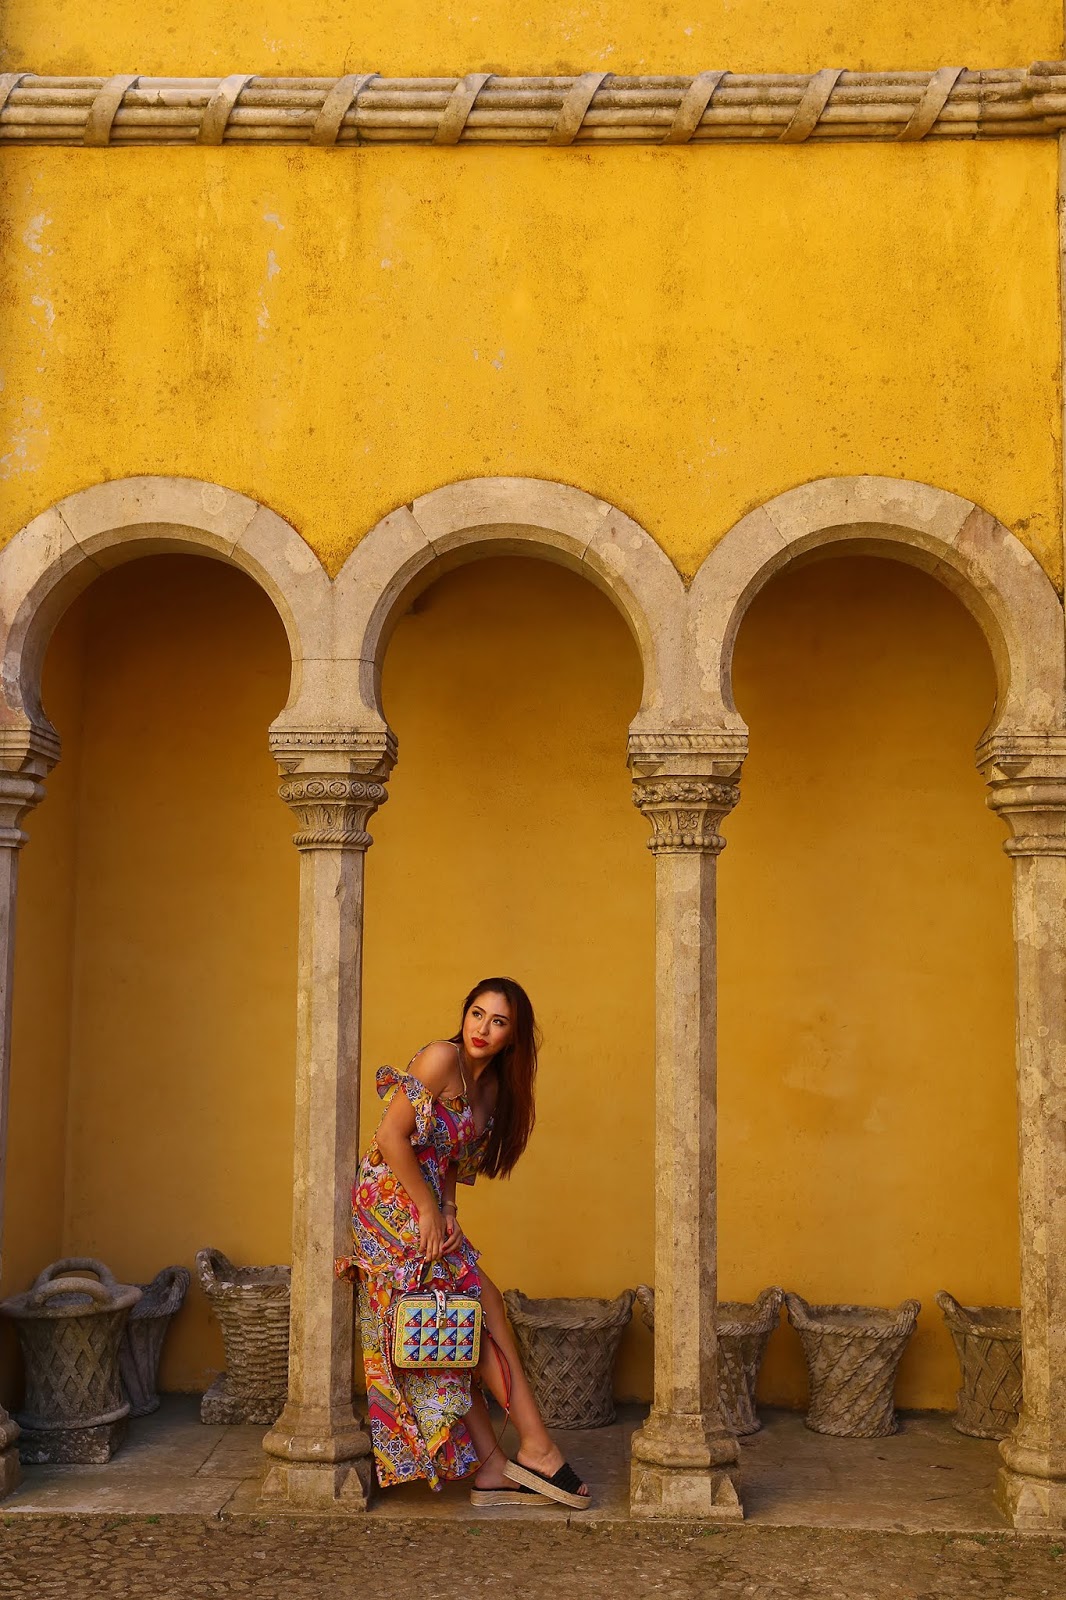 No need to adjust your sets: the famously colourful Pena Palace in Sintra, Portugal; is indeed a technicolour dream castle. Read more on Posh, Broke, & Bored.